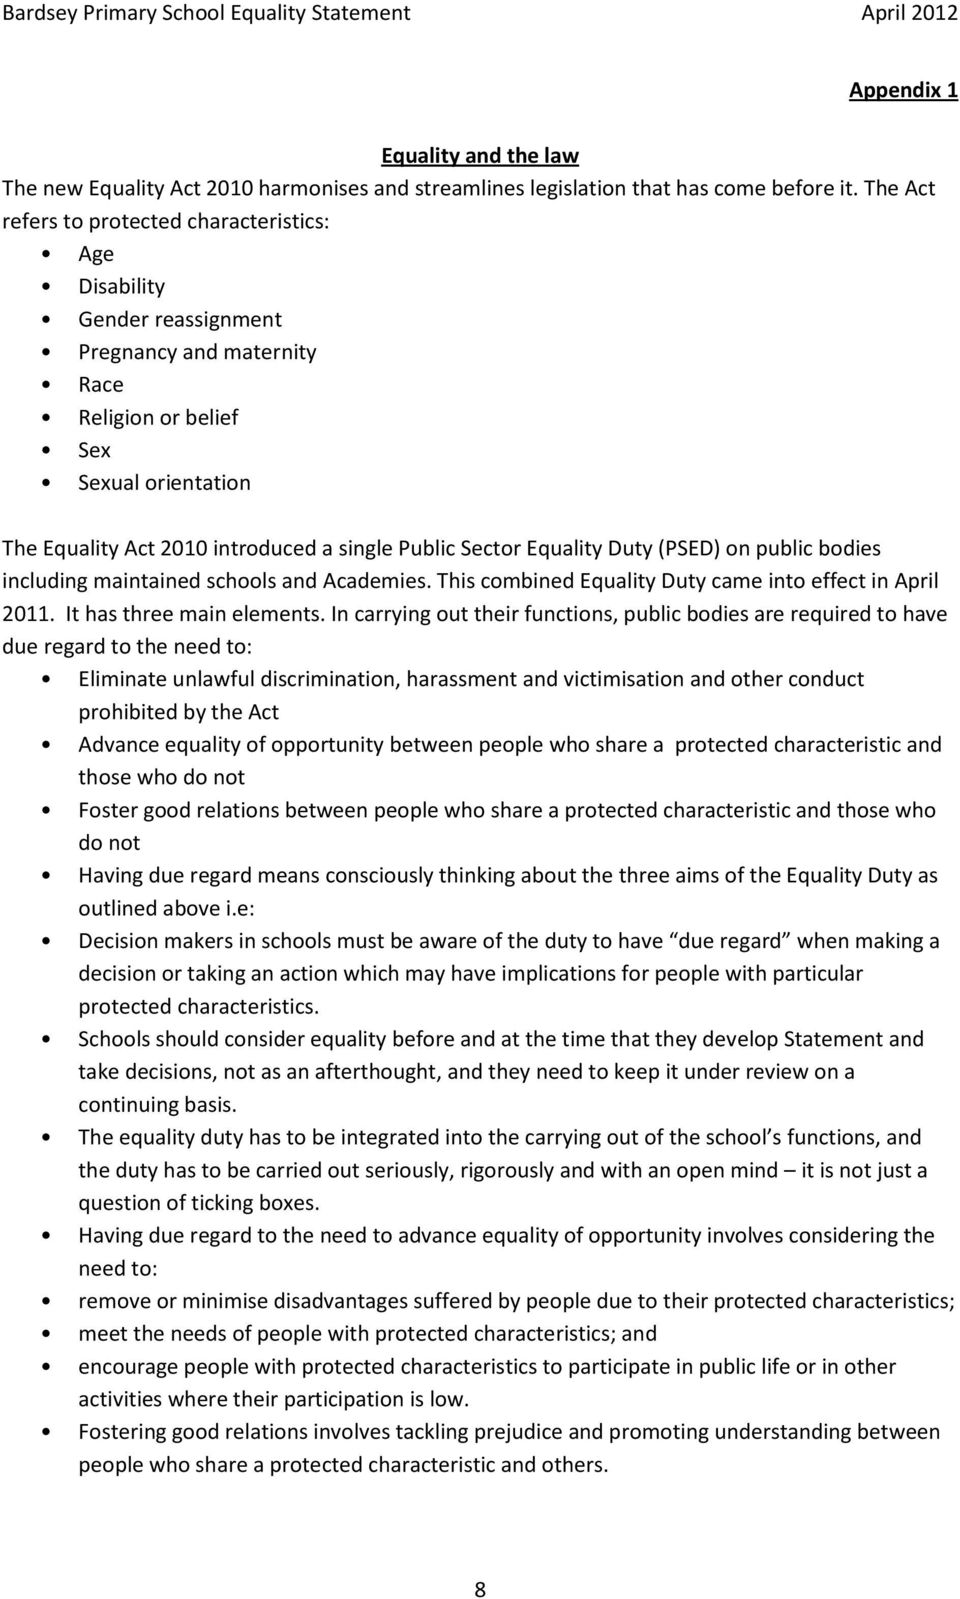 Sector Equality Duty (PSED) on public bodies including maintained schools and Academies. This combined Equality Duty came into effect in April 2011. It has three main elements.